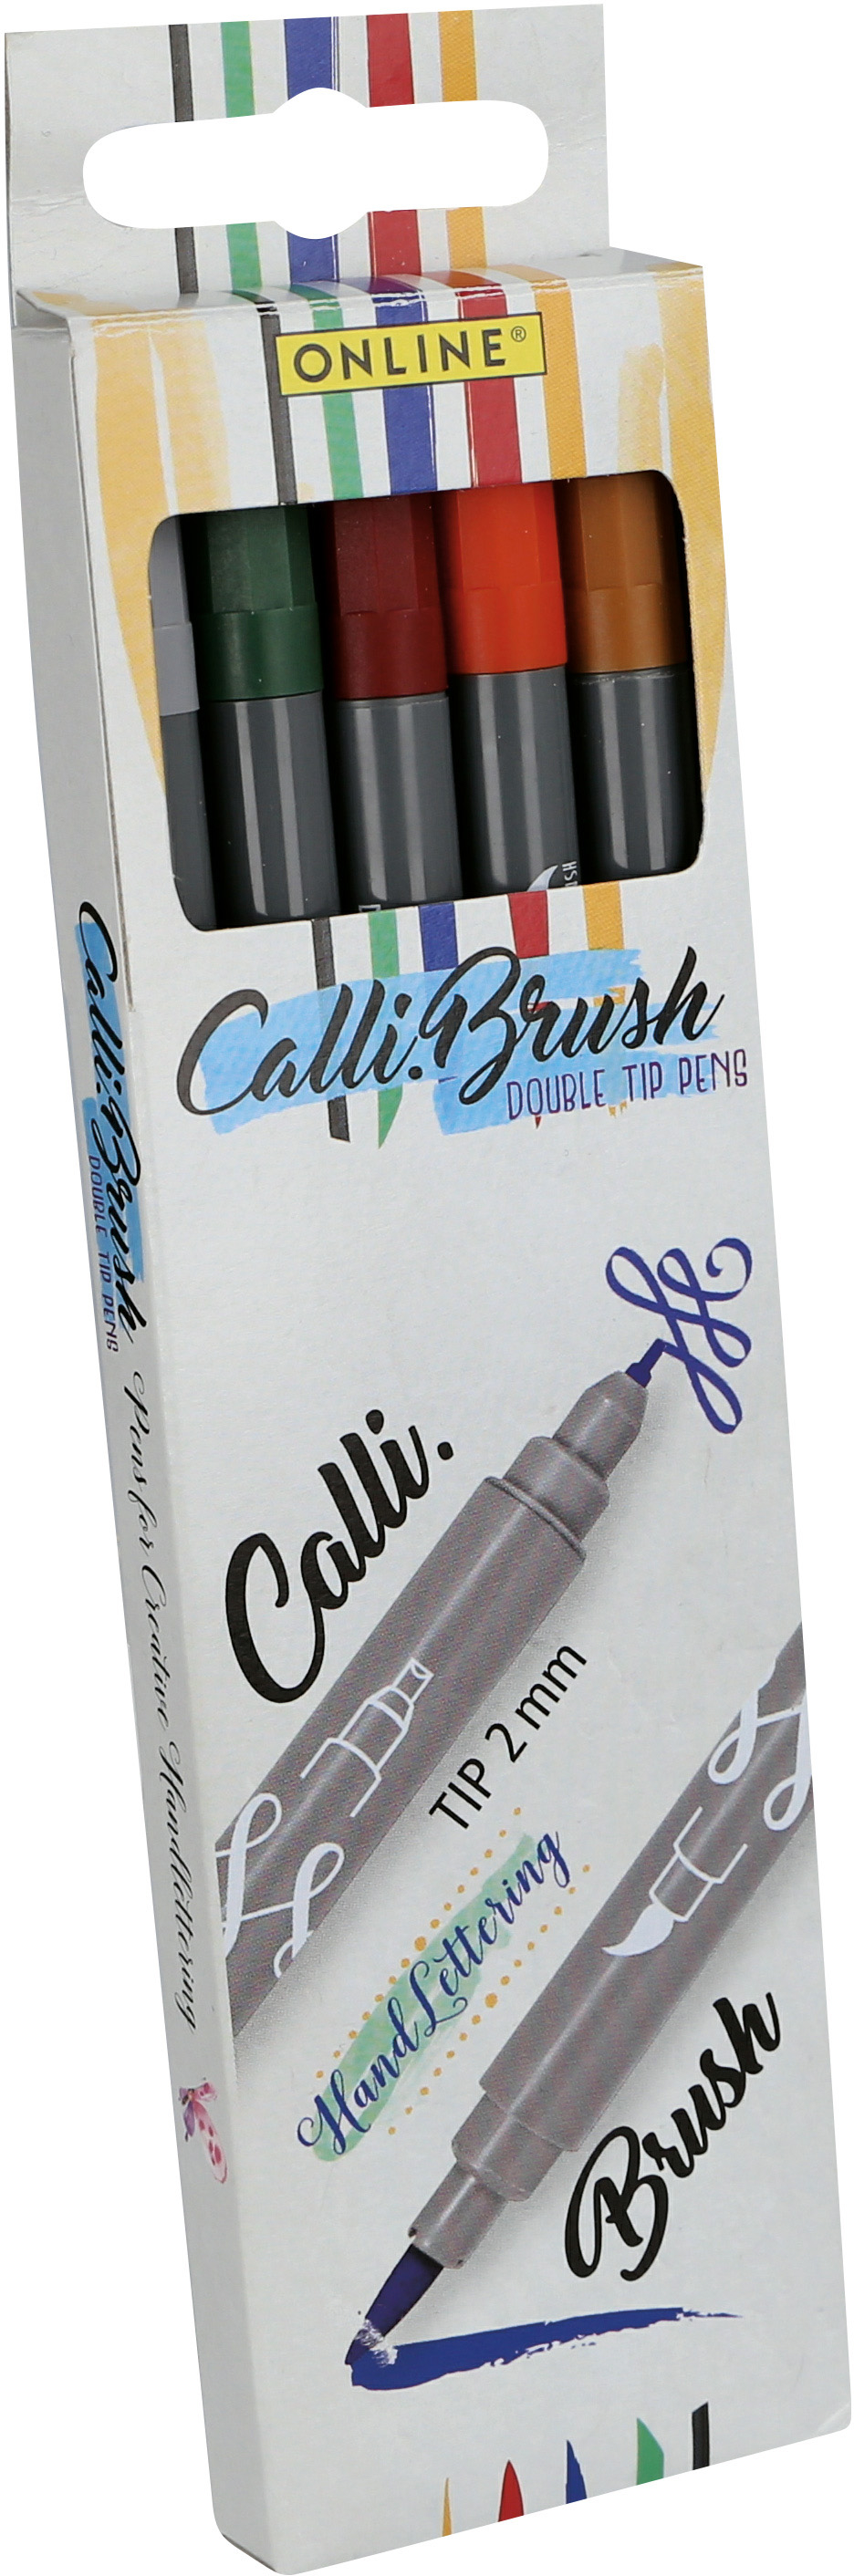 ONLINE Calli Brush Nature 19133 5 couleurs Double Tip, 2mm 5 couleurs Double Tip, 2mm